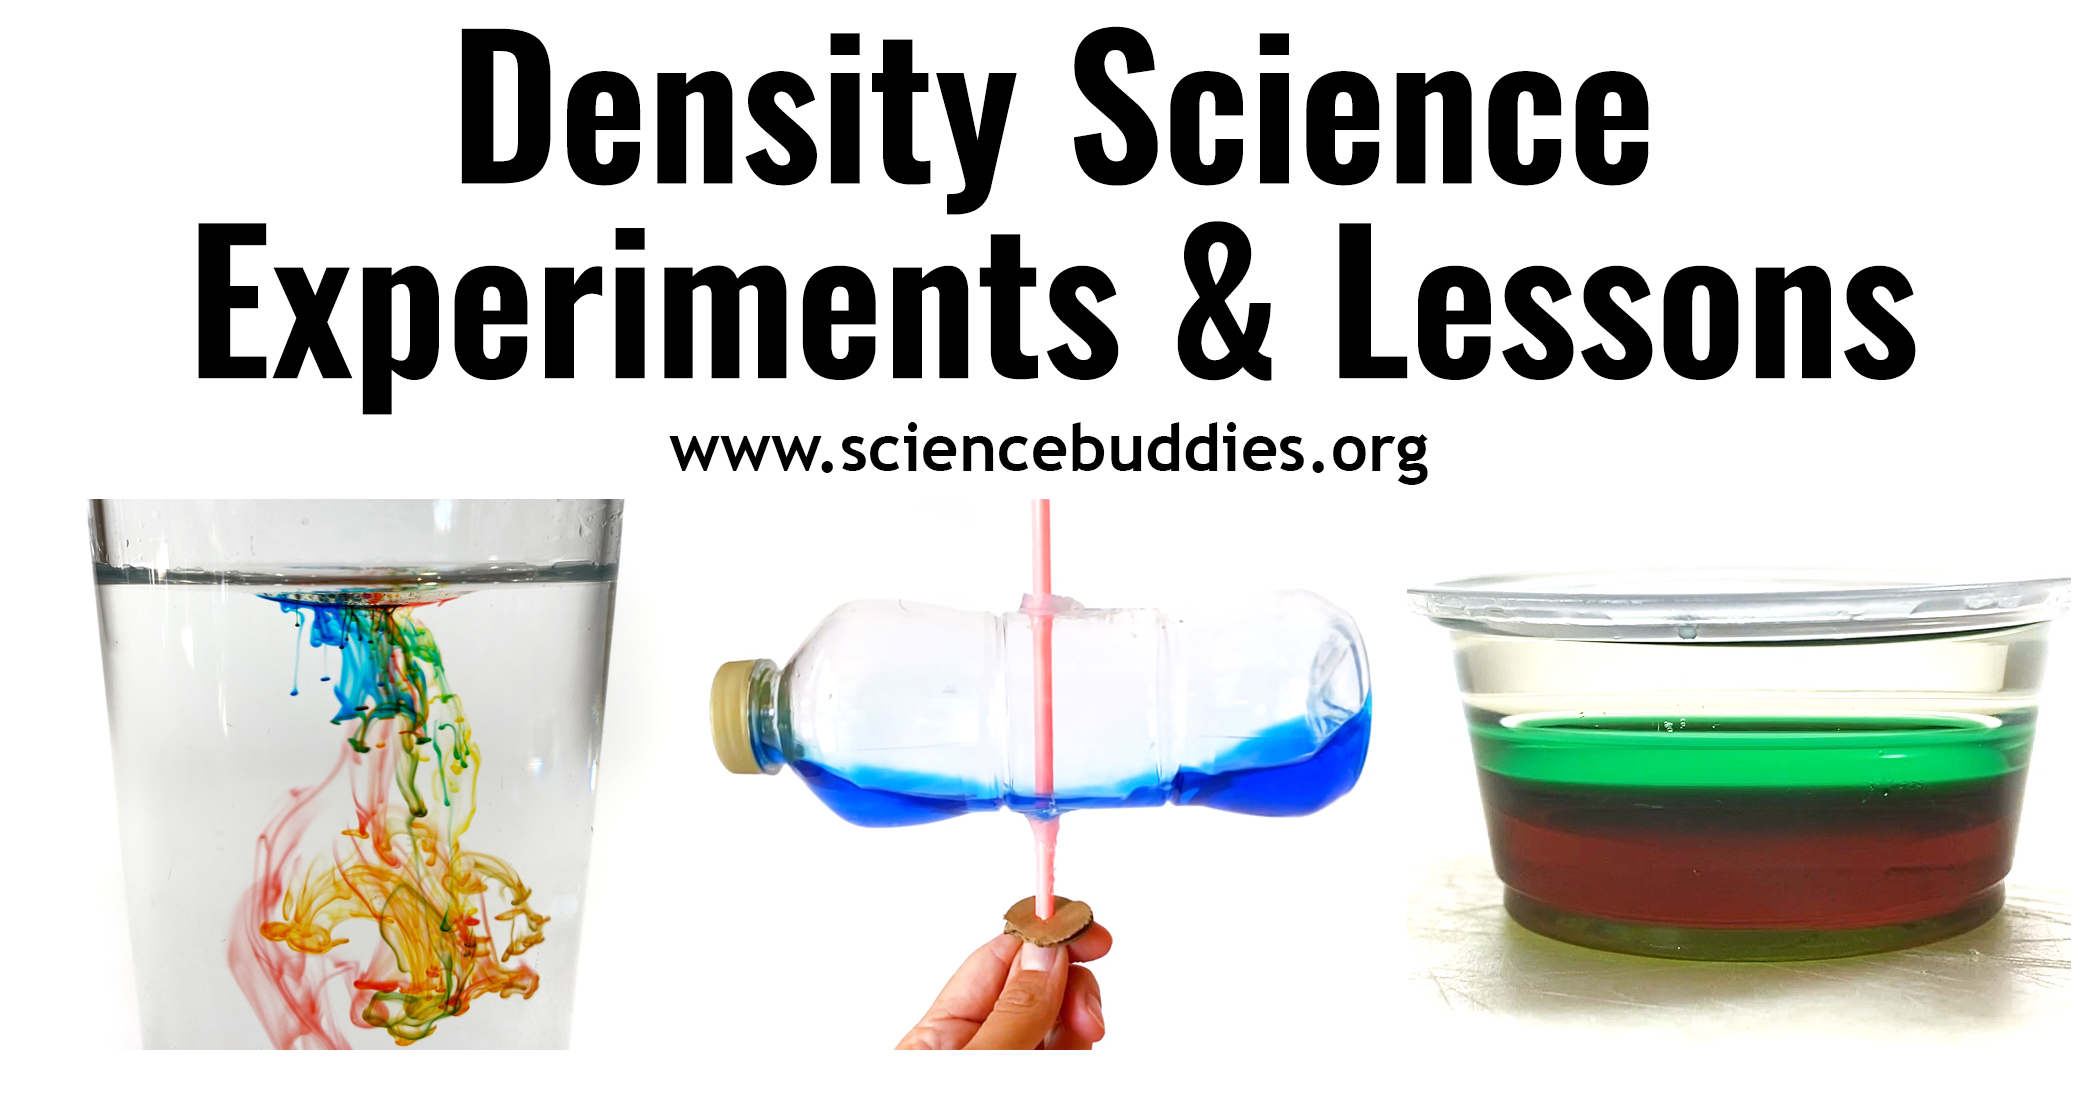 15 Density Science Experiments